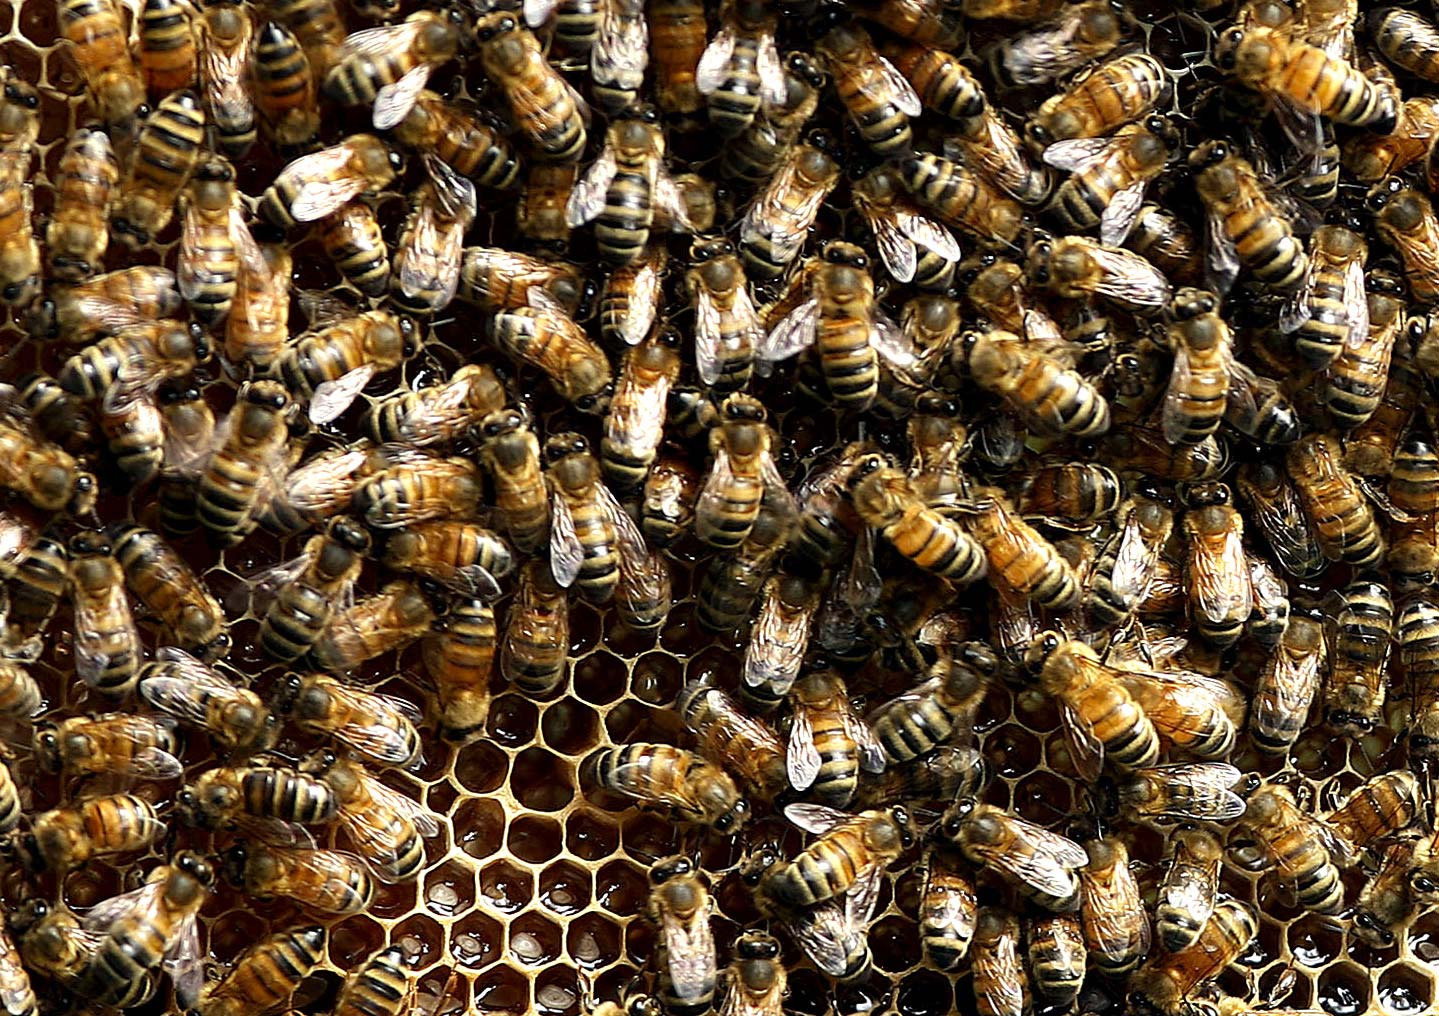 Bees crawl over a honeycomb section removed from one the beehives at Lambeth Palace, London, U.K., on July 23, 2008. (Simon Dawson—Bloomberg/Getty Images)